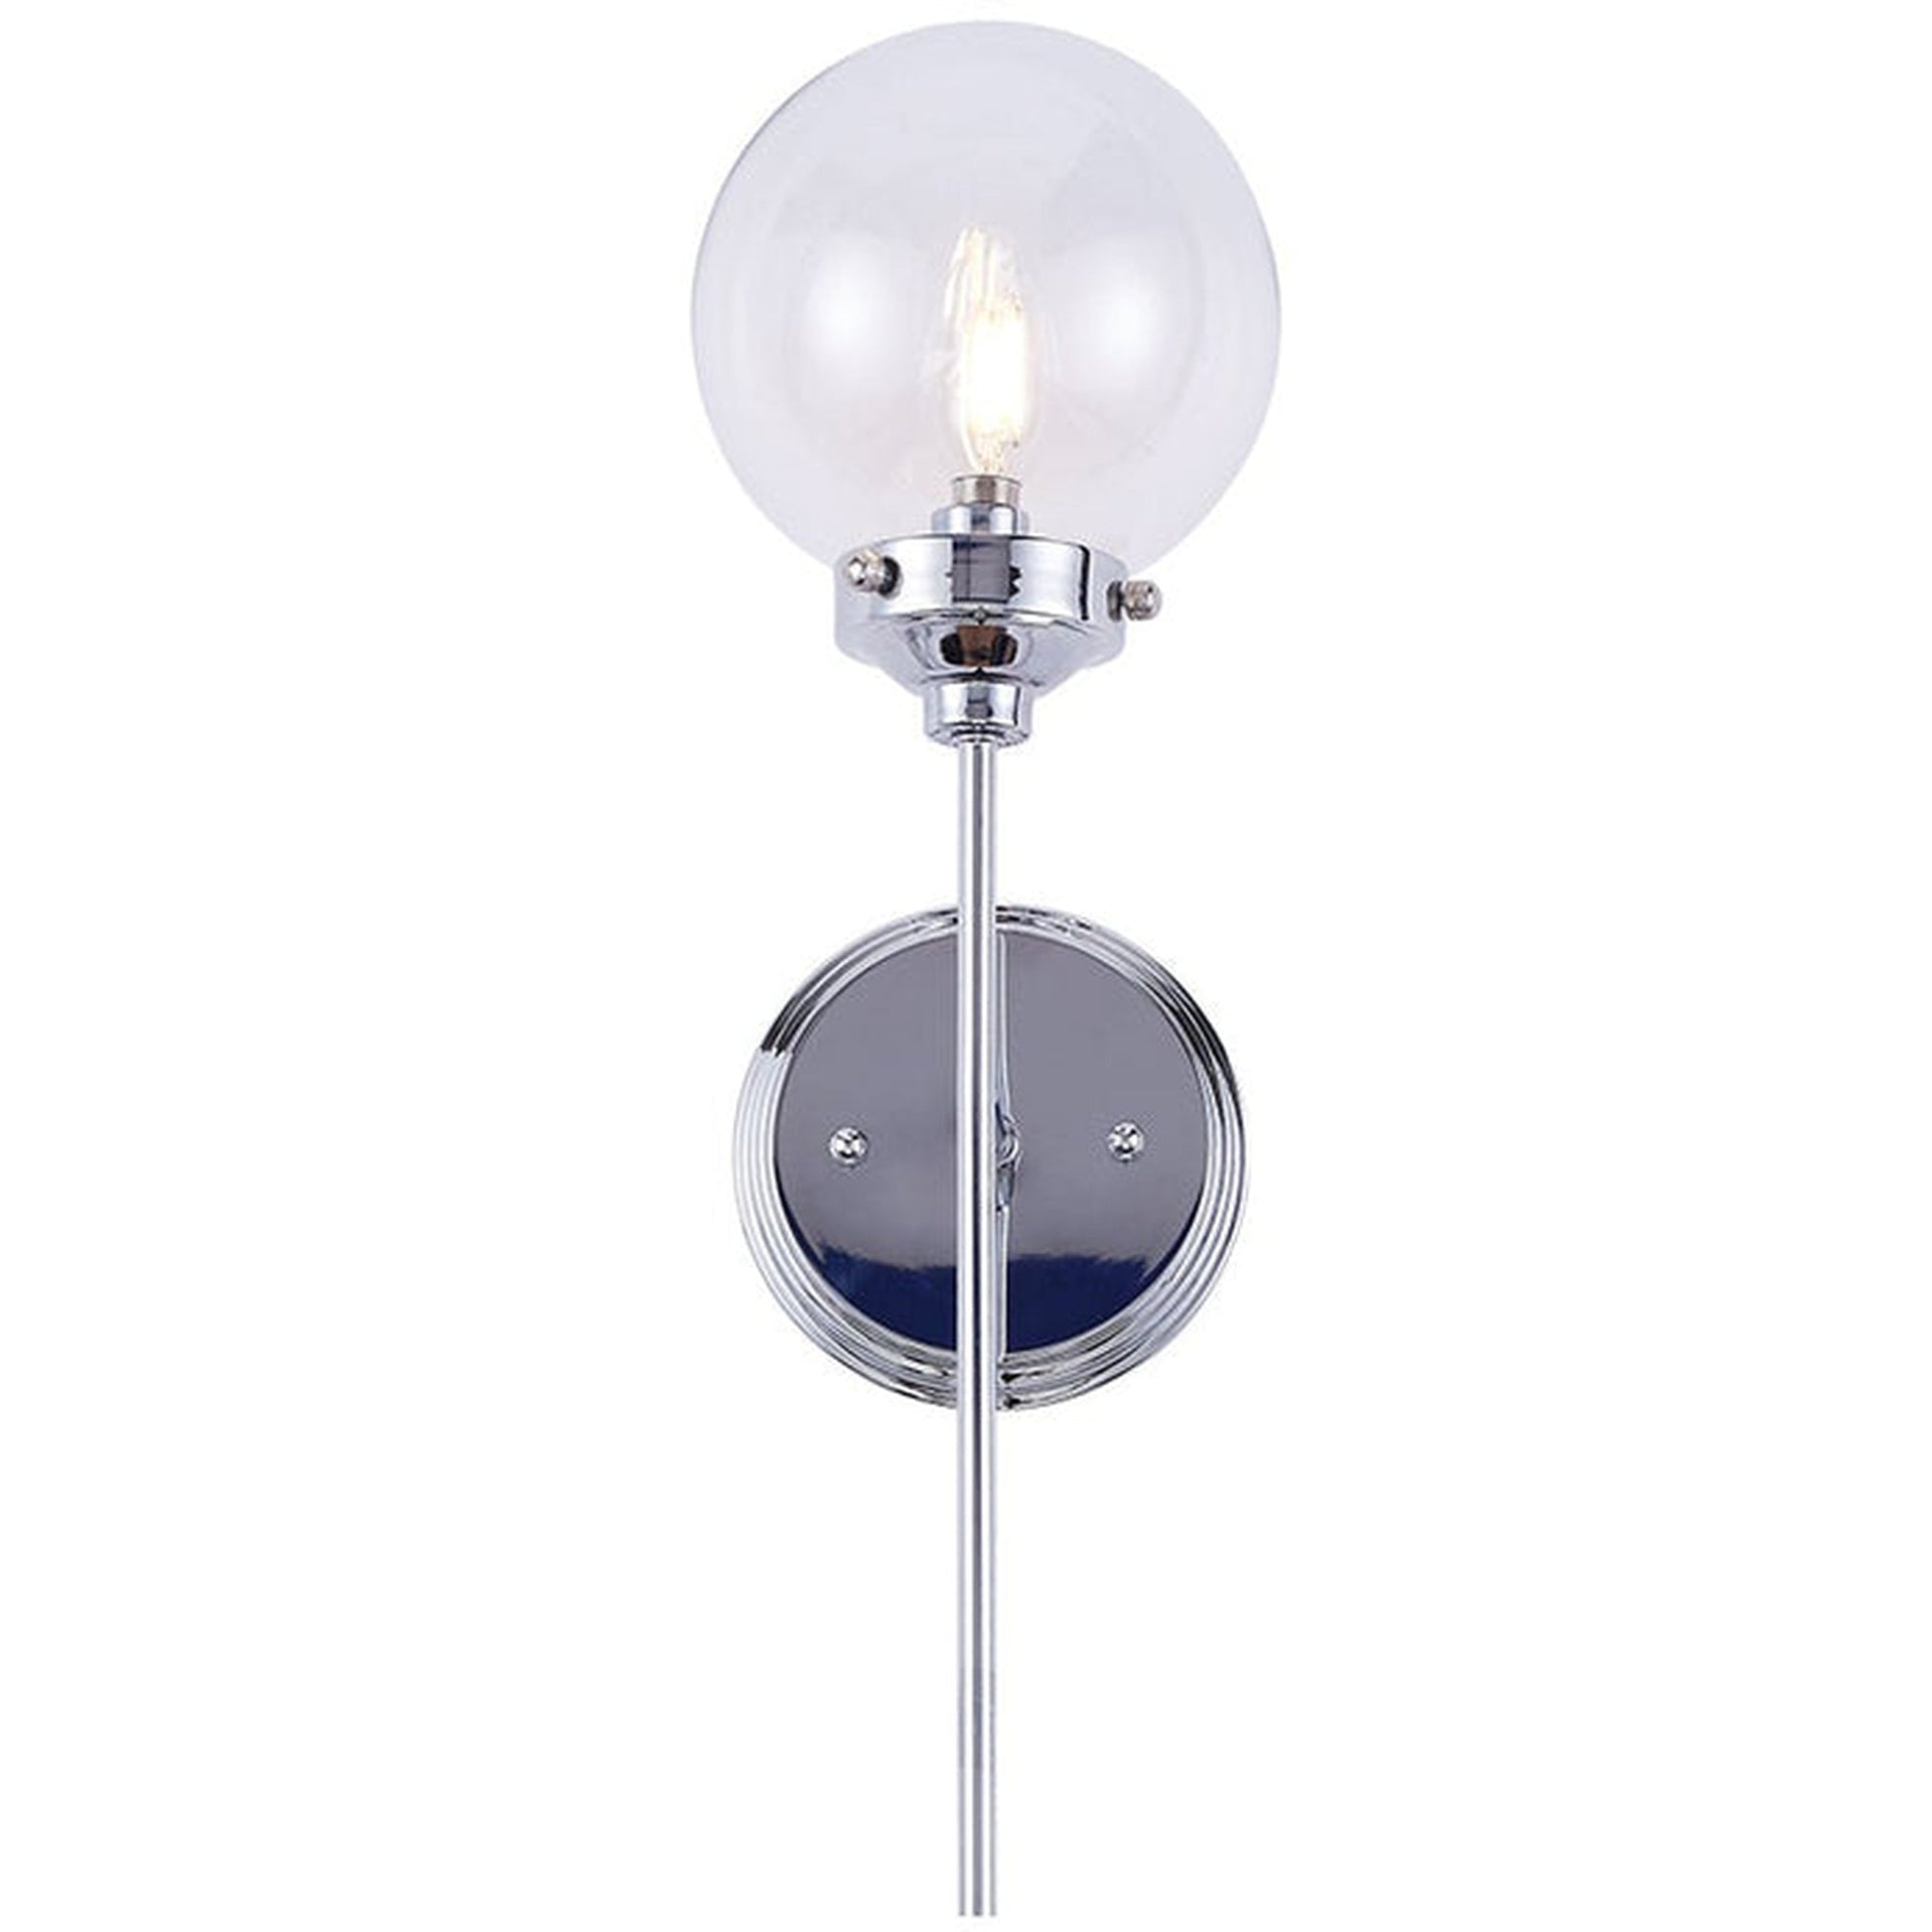 Vanity Art 6" Chrome 1-Light LED Wall Sconce With Clear Glass Shade